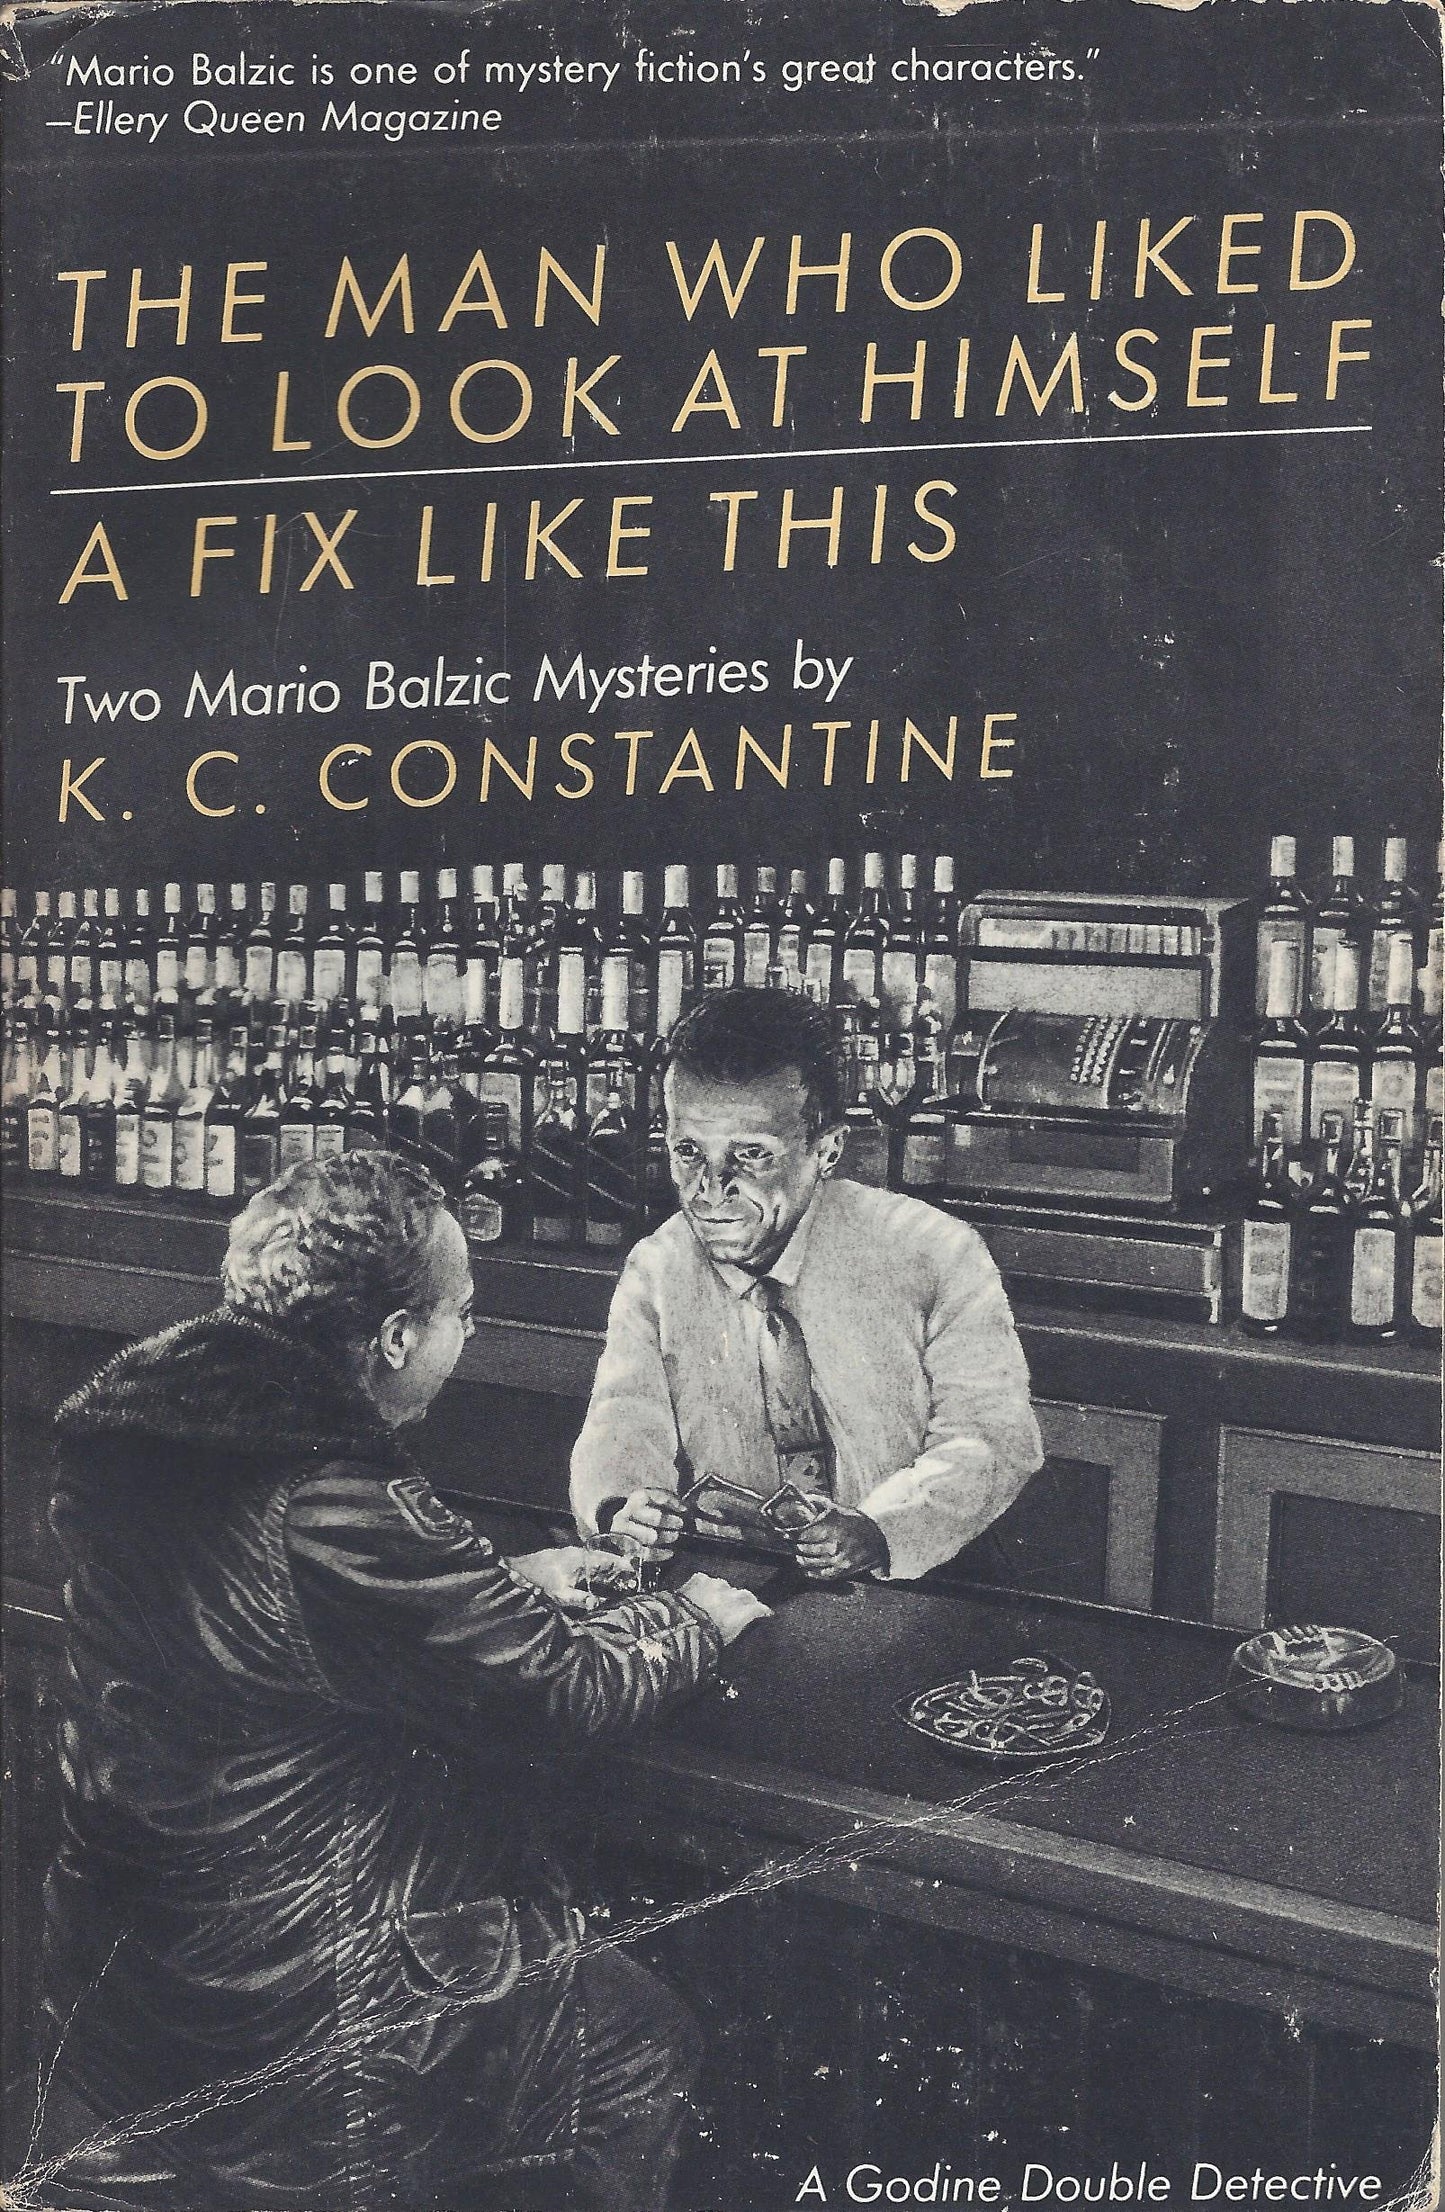 The Man Who Liked to Look at Himself / A Fix Like This: Two Mario Balzic Mysteries (Godine Double Detective, No. 3)